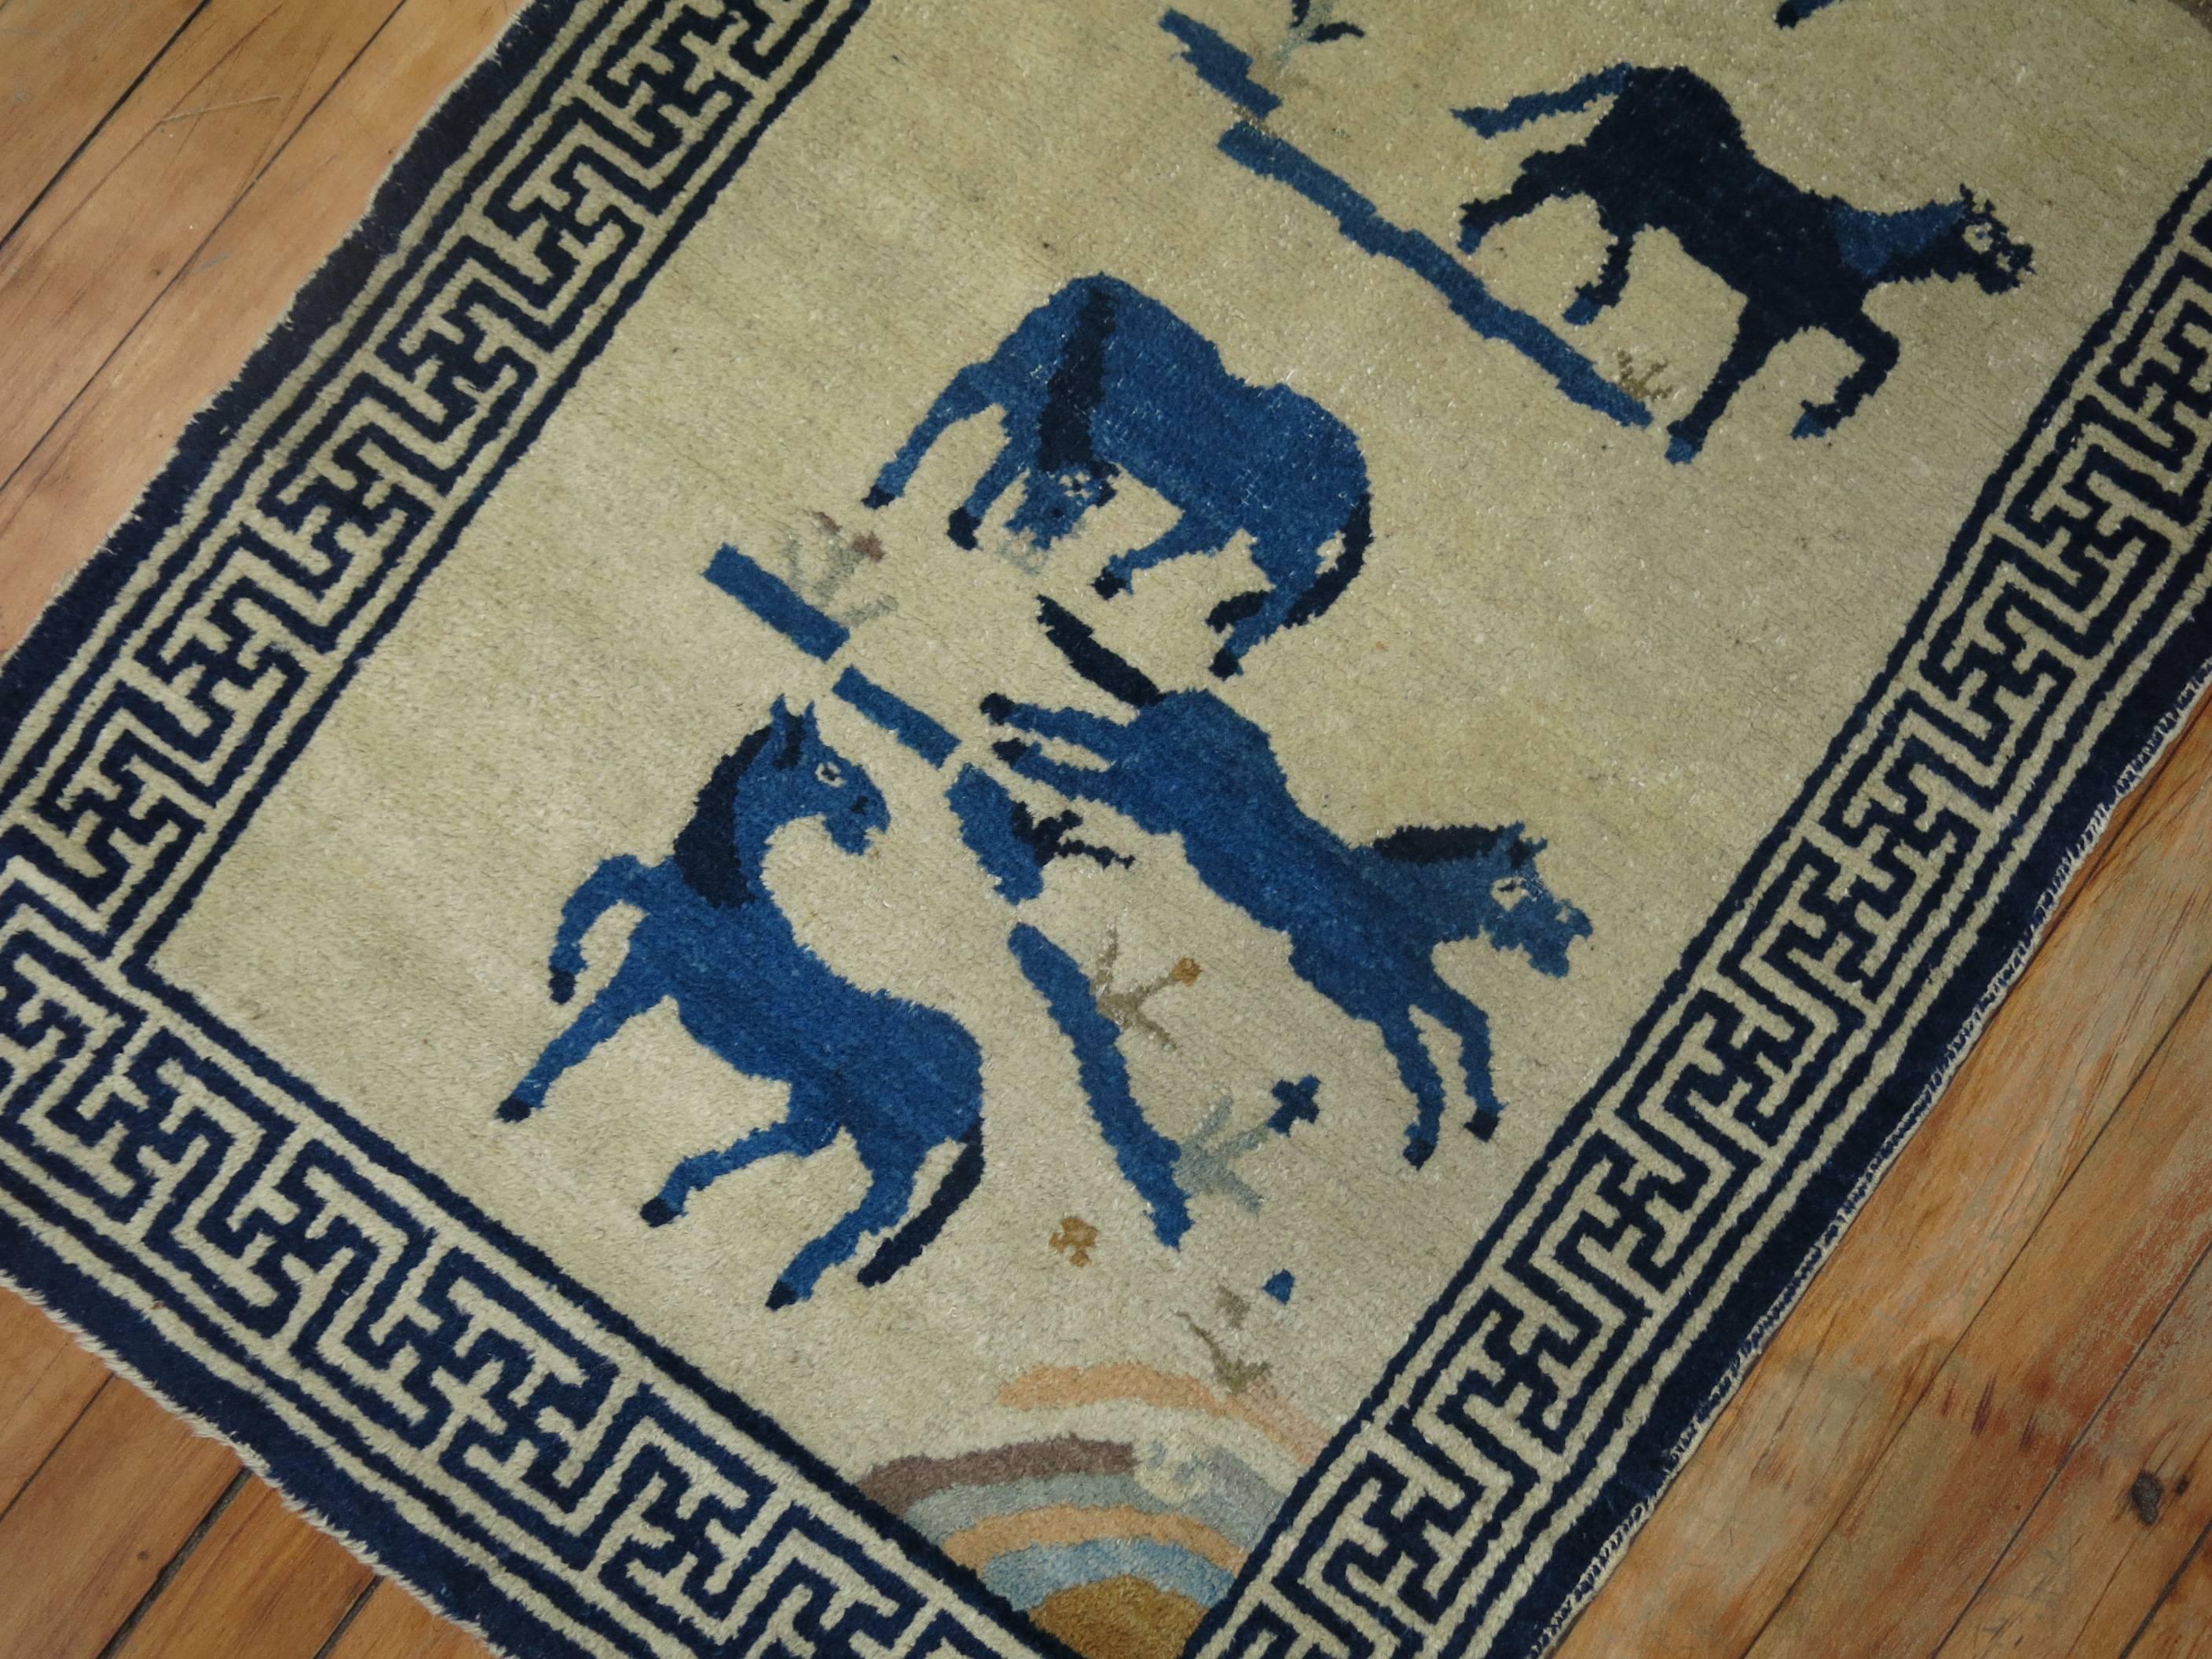 Horses Chinese Antique Pictorial Rug In Good Condition For Sale In New York, NY